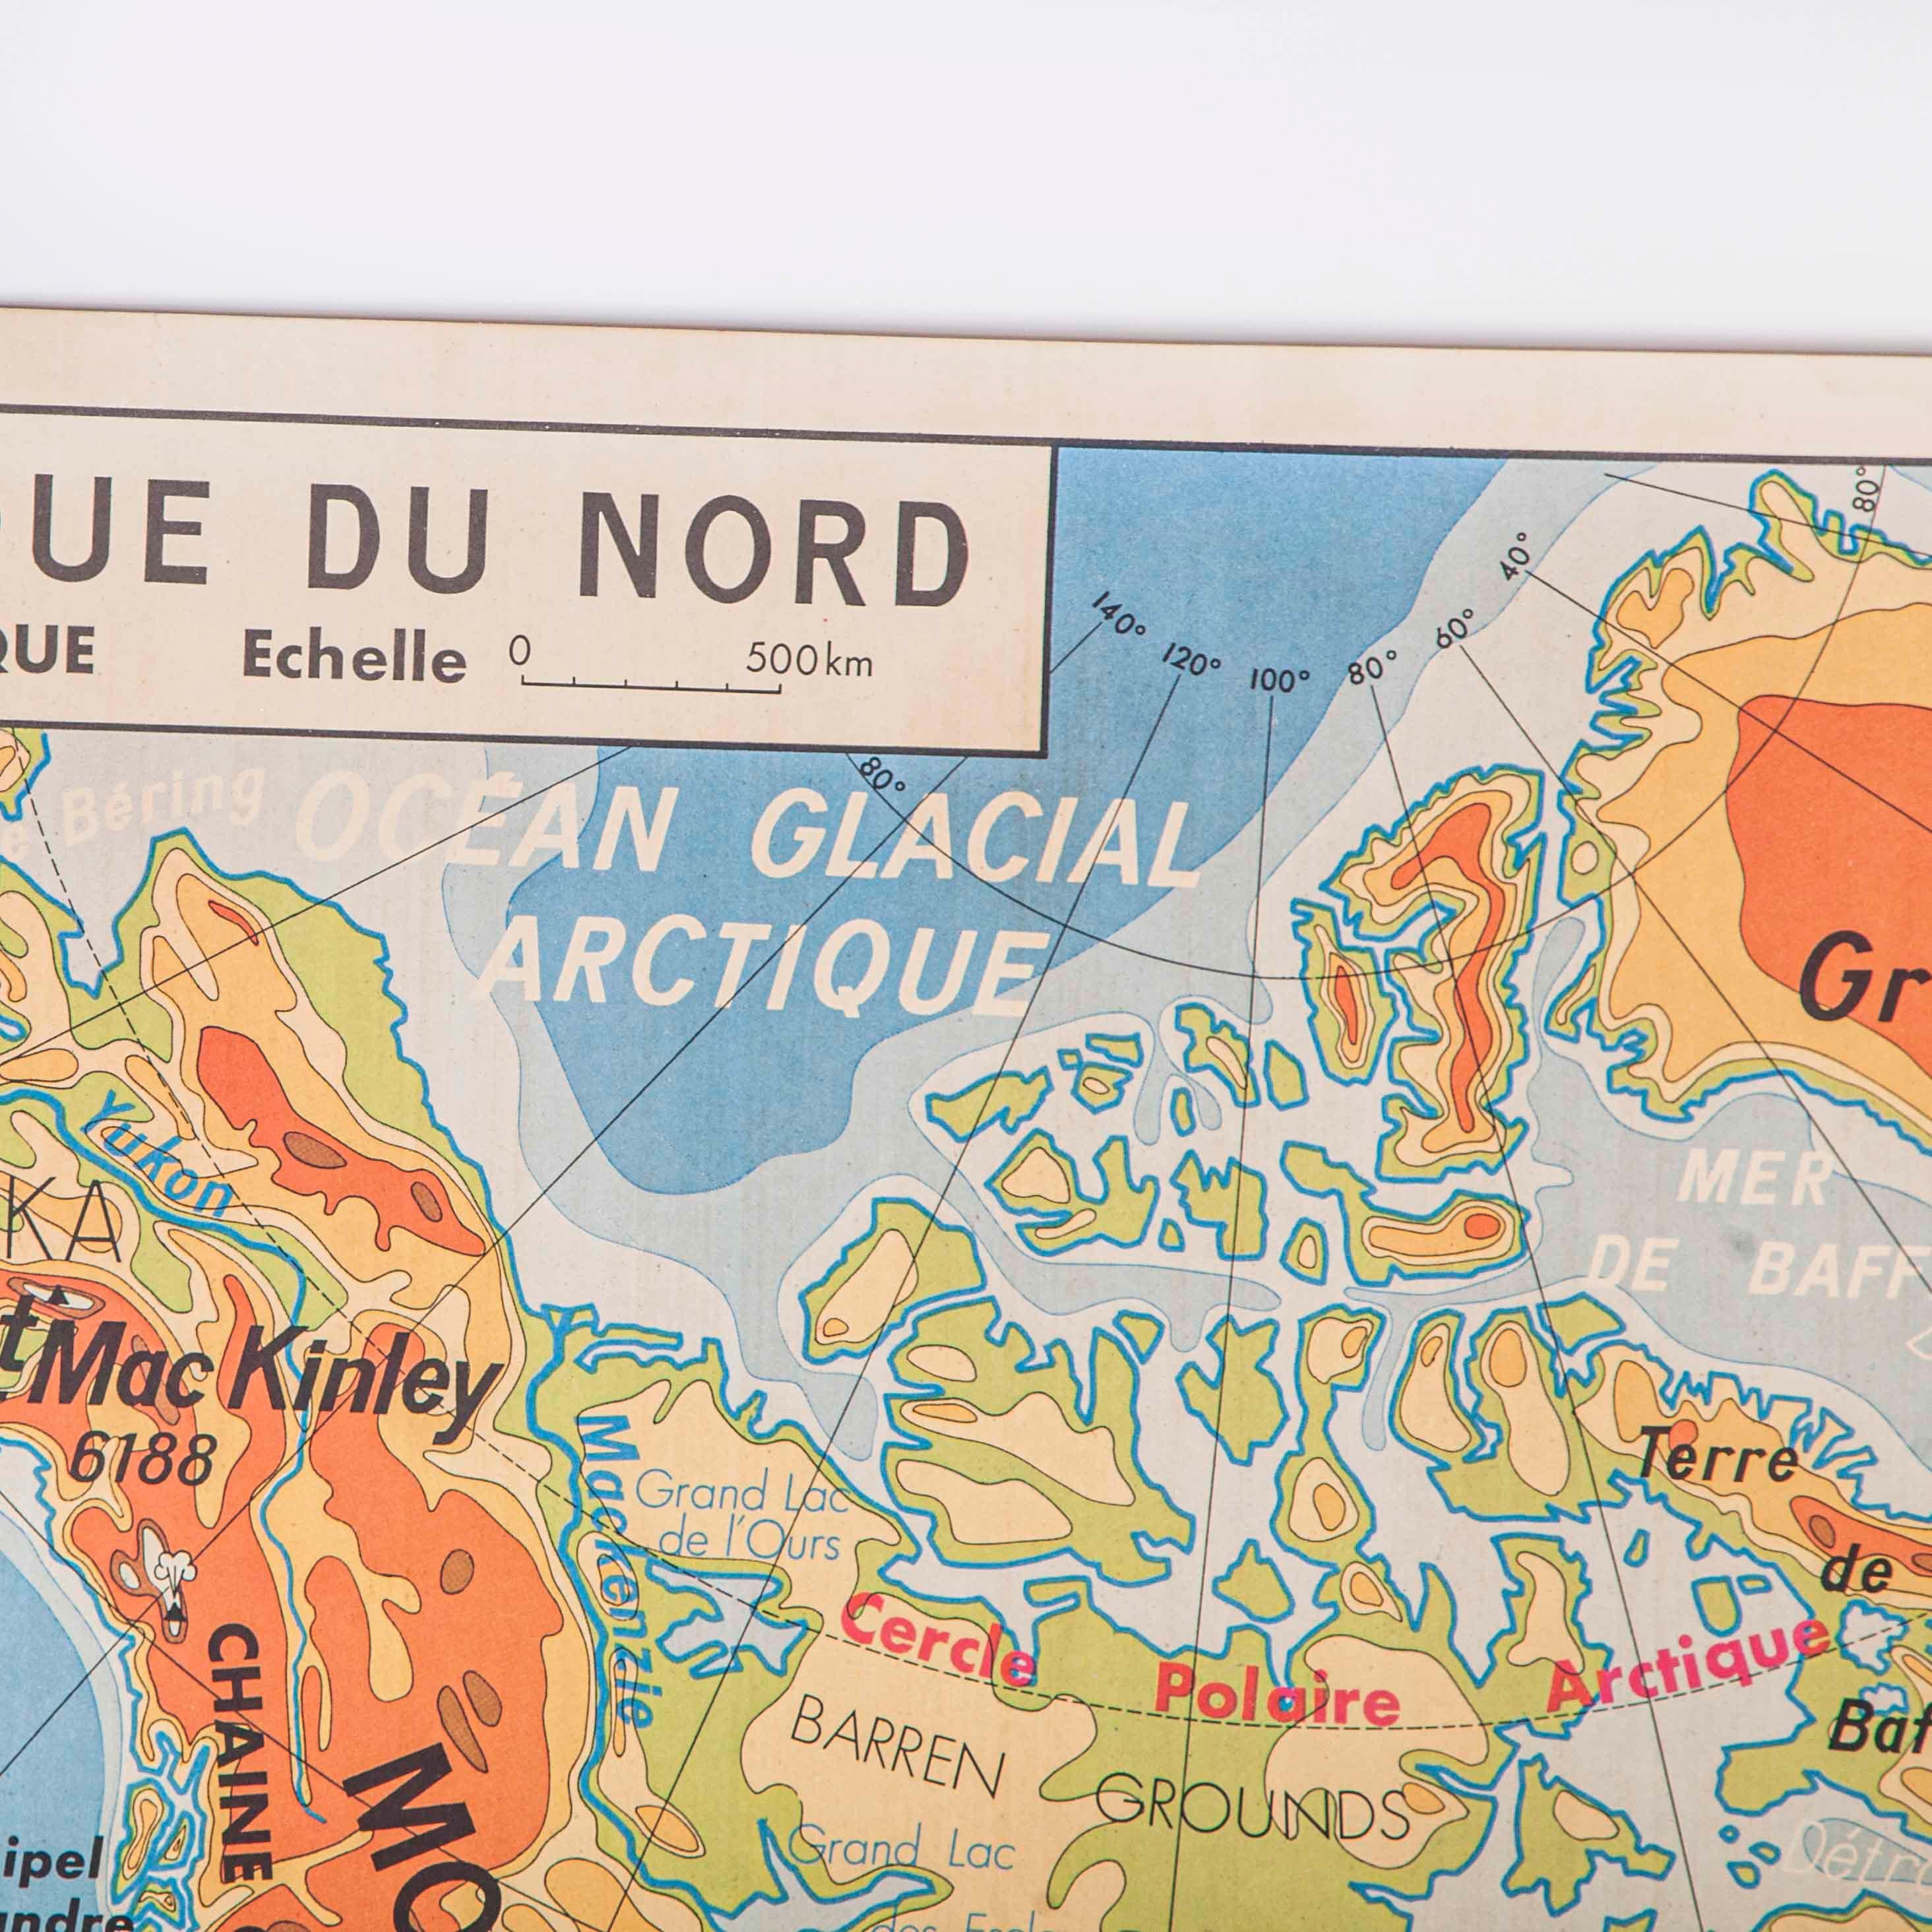 Paper French Double Sided Educational School Poster Of The Physical Geography Of North